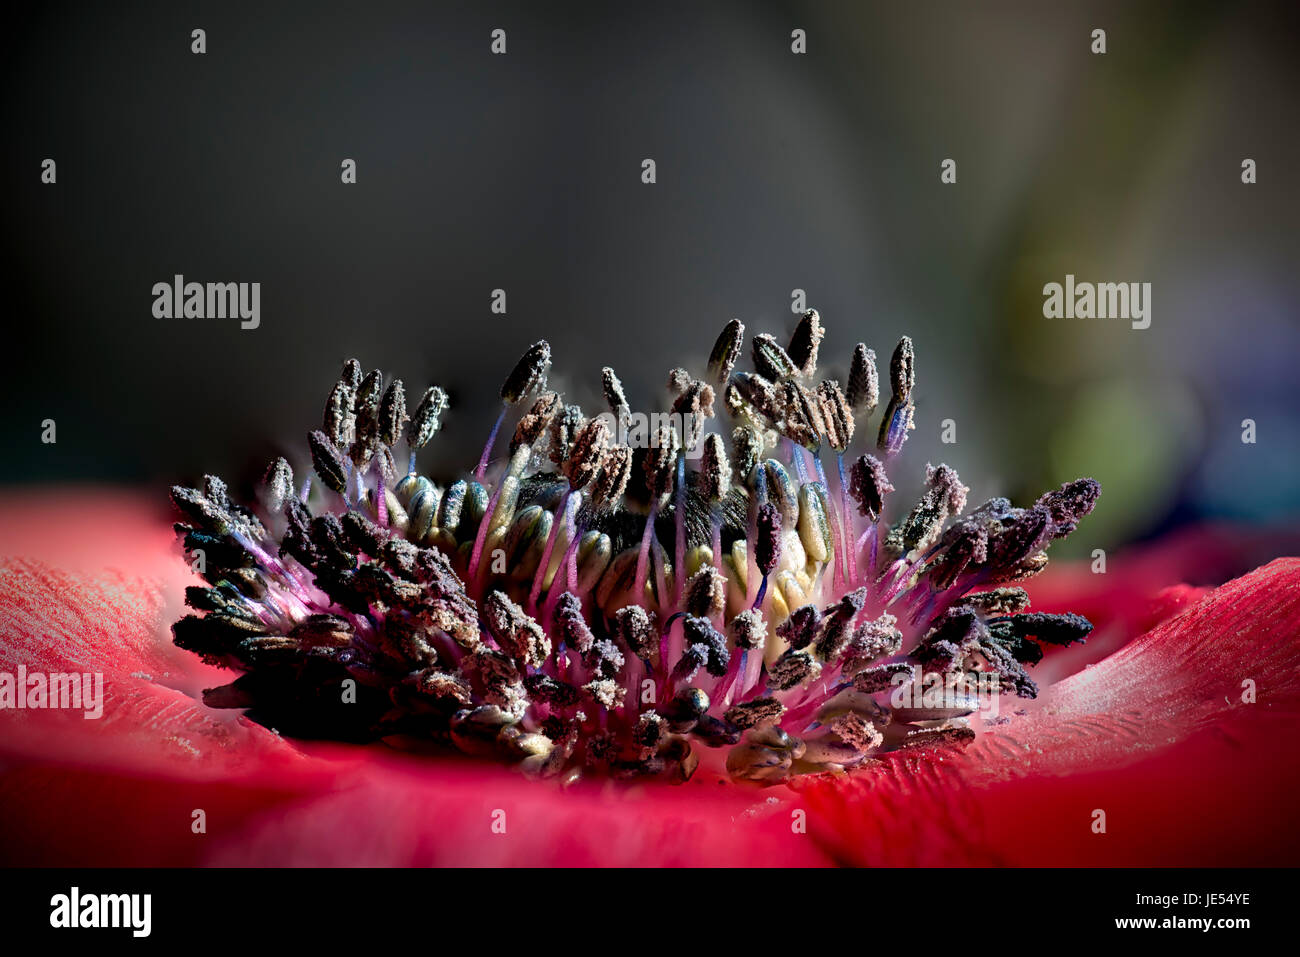 Focus stacking is showing the tiny details of an anemone. Stock Photo